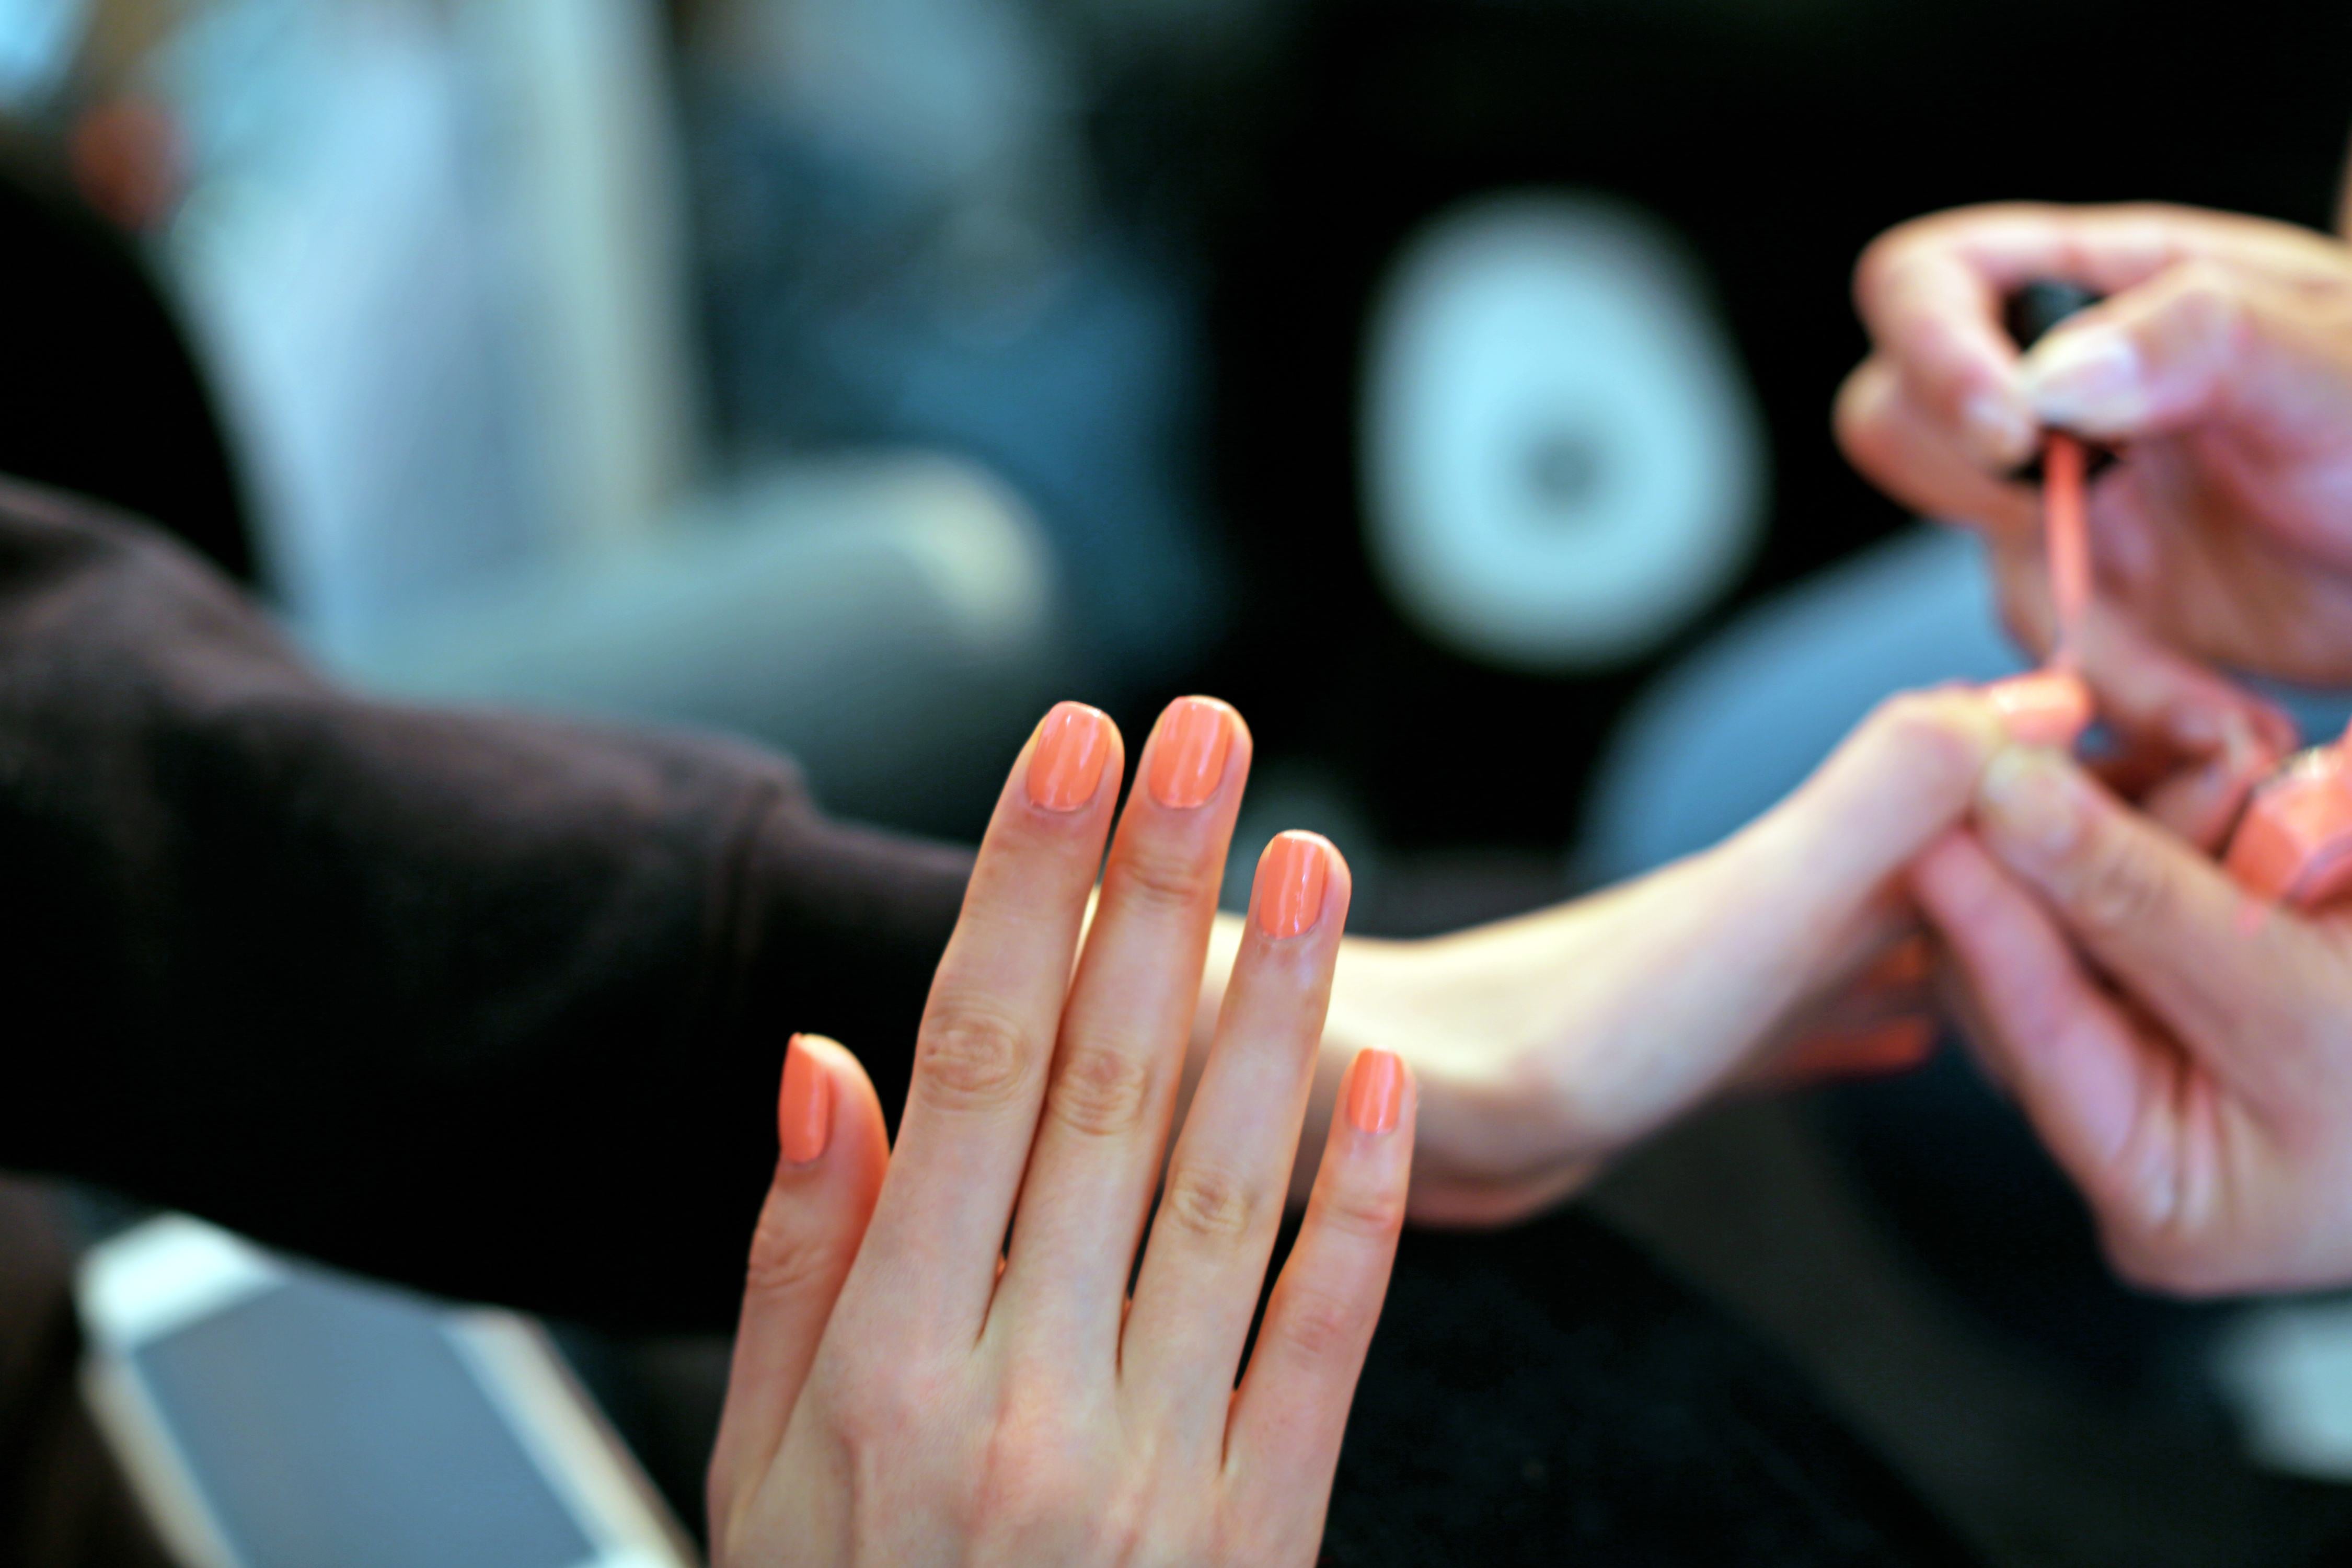 Getting a manicure? Wear gloves or sunscreen, GP warns, after